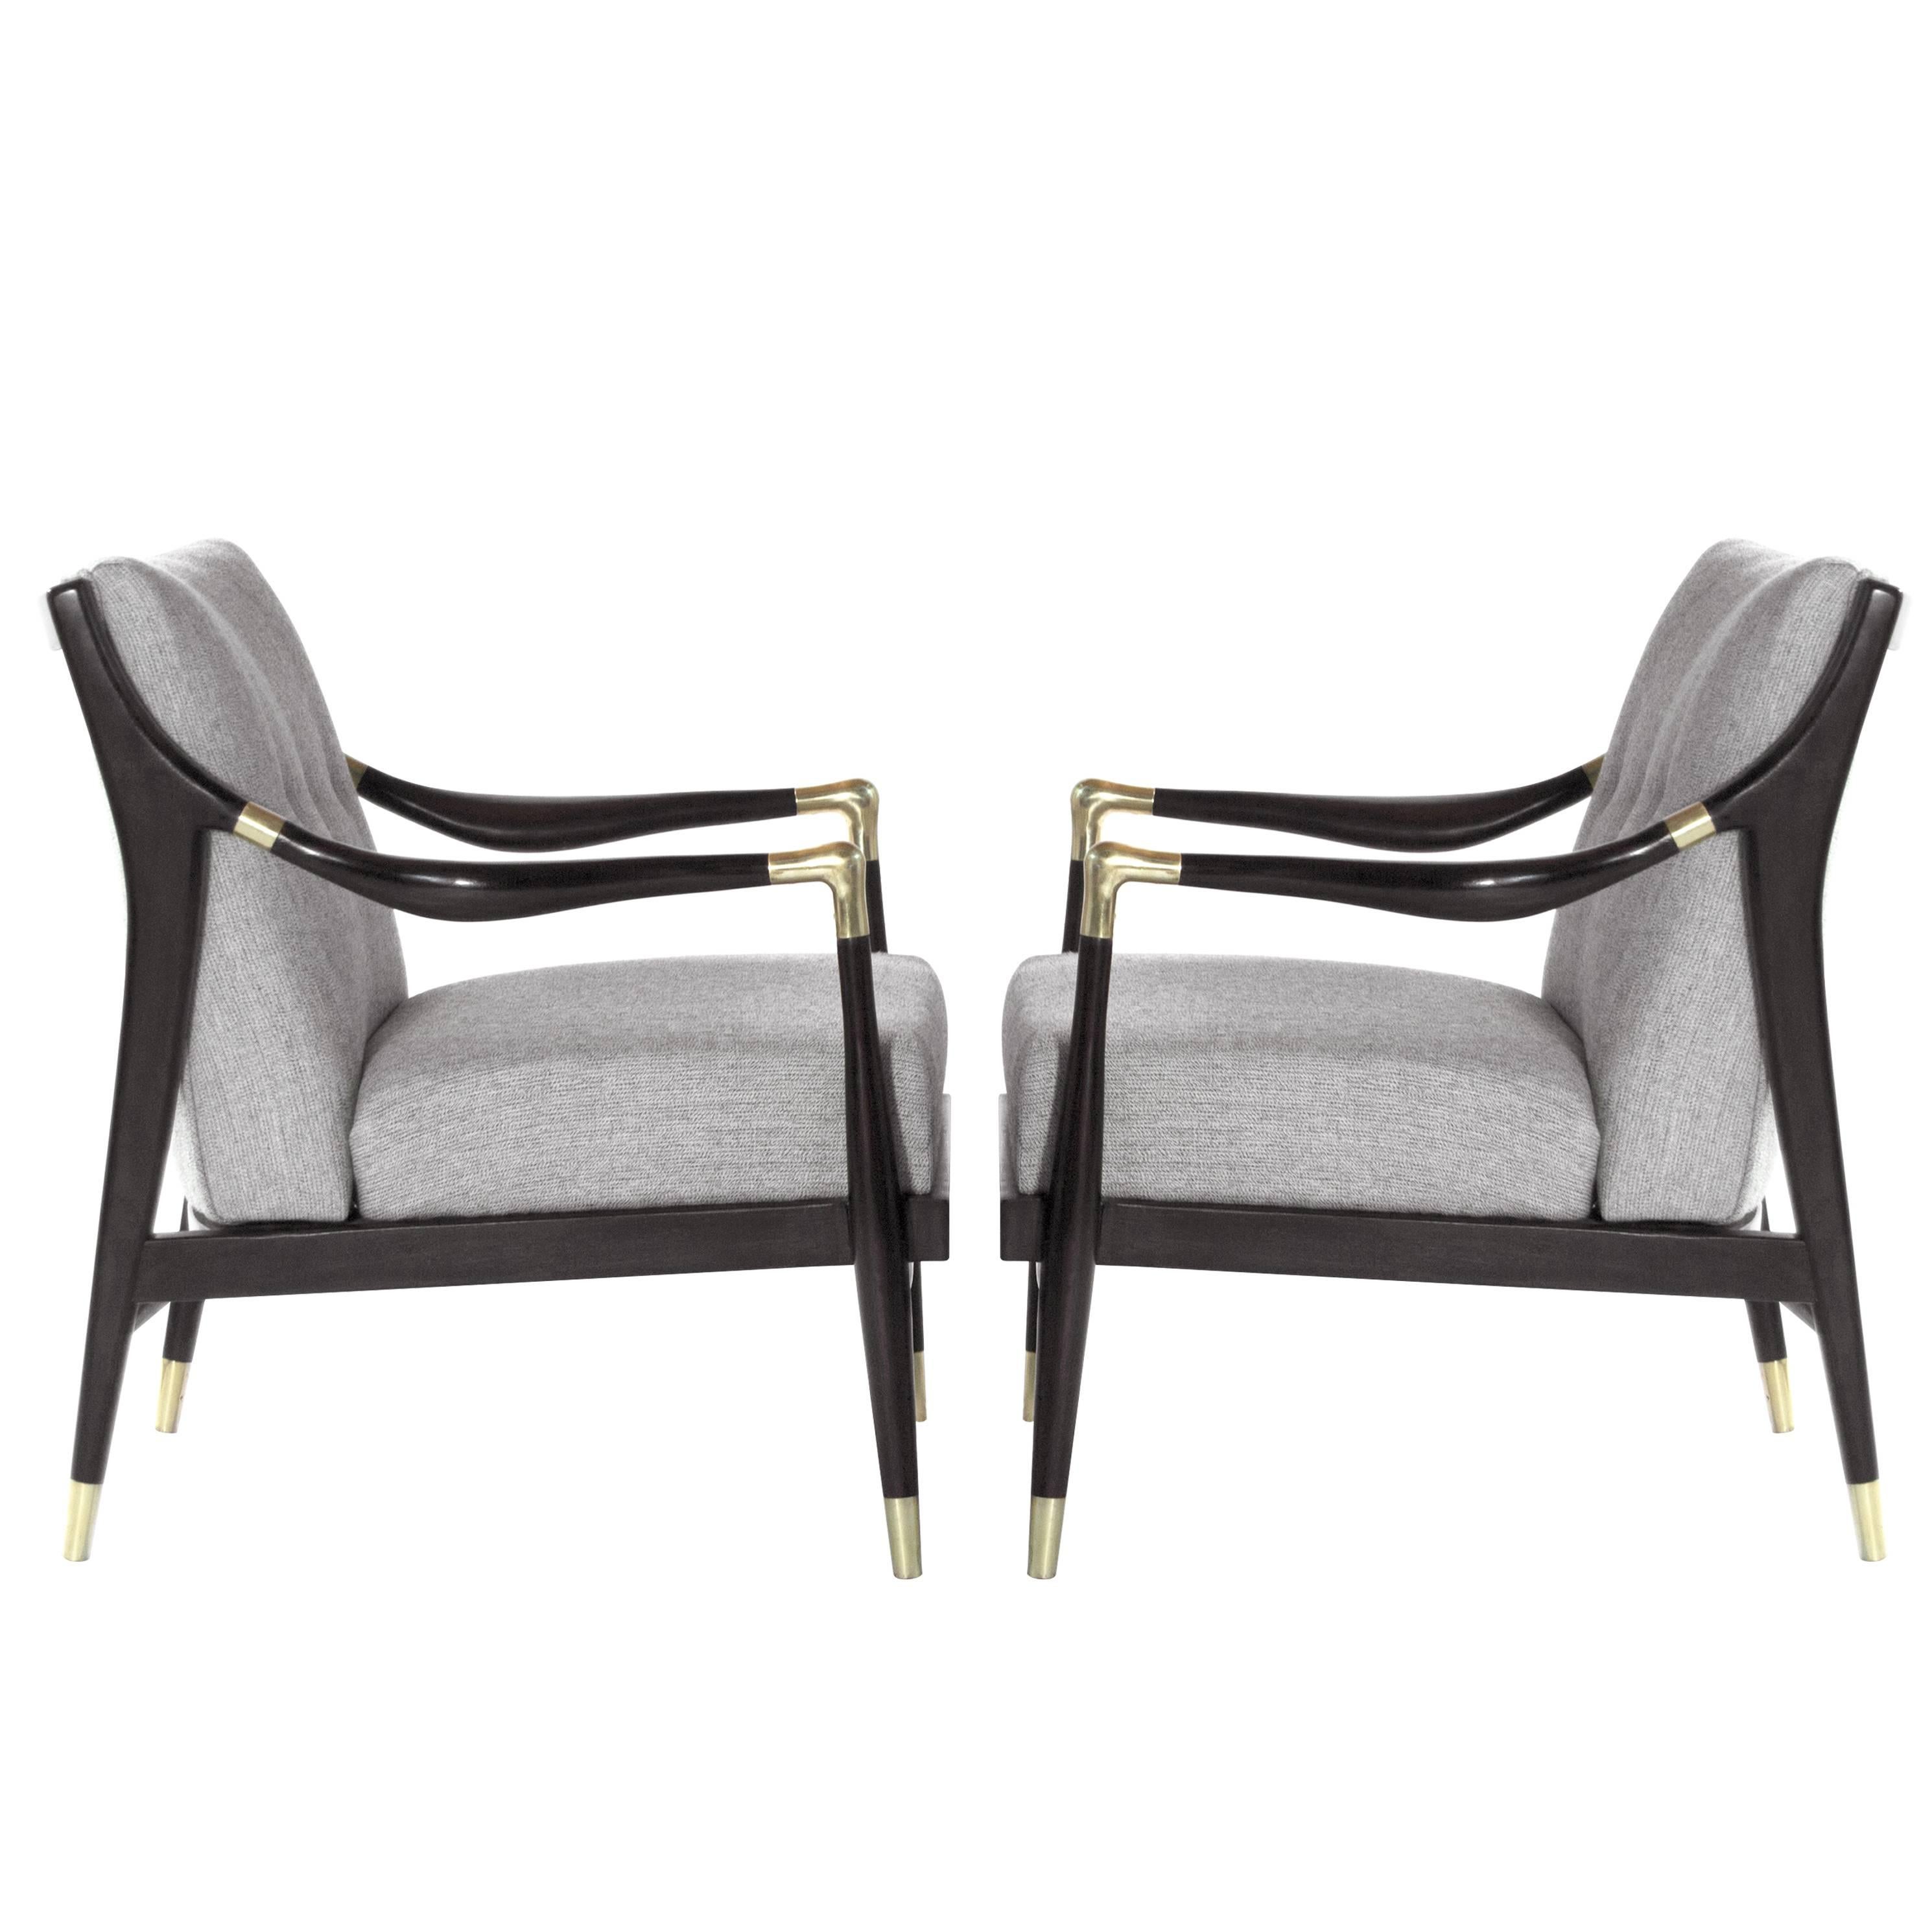 Pair of Sculptural Lounge Chairs in the Manner of Gio Ponti